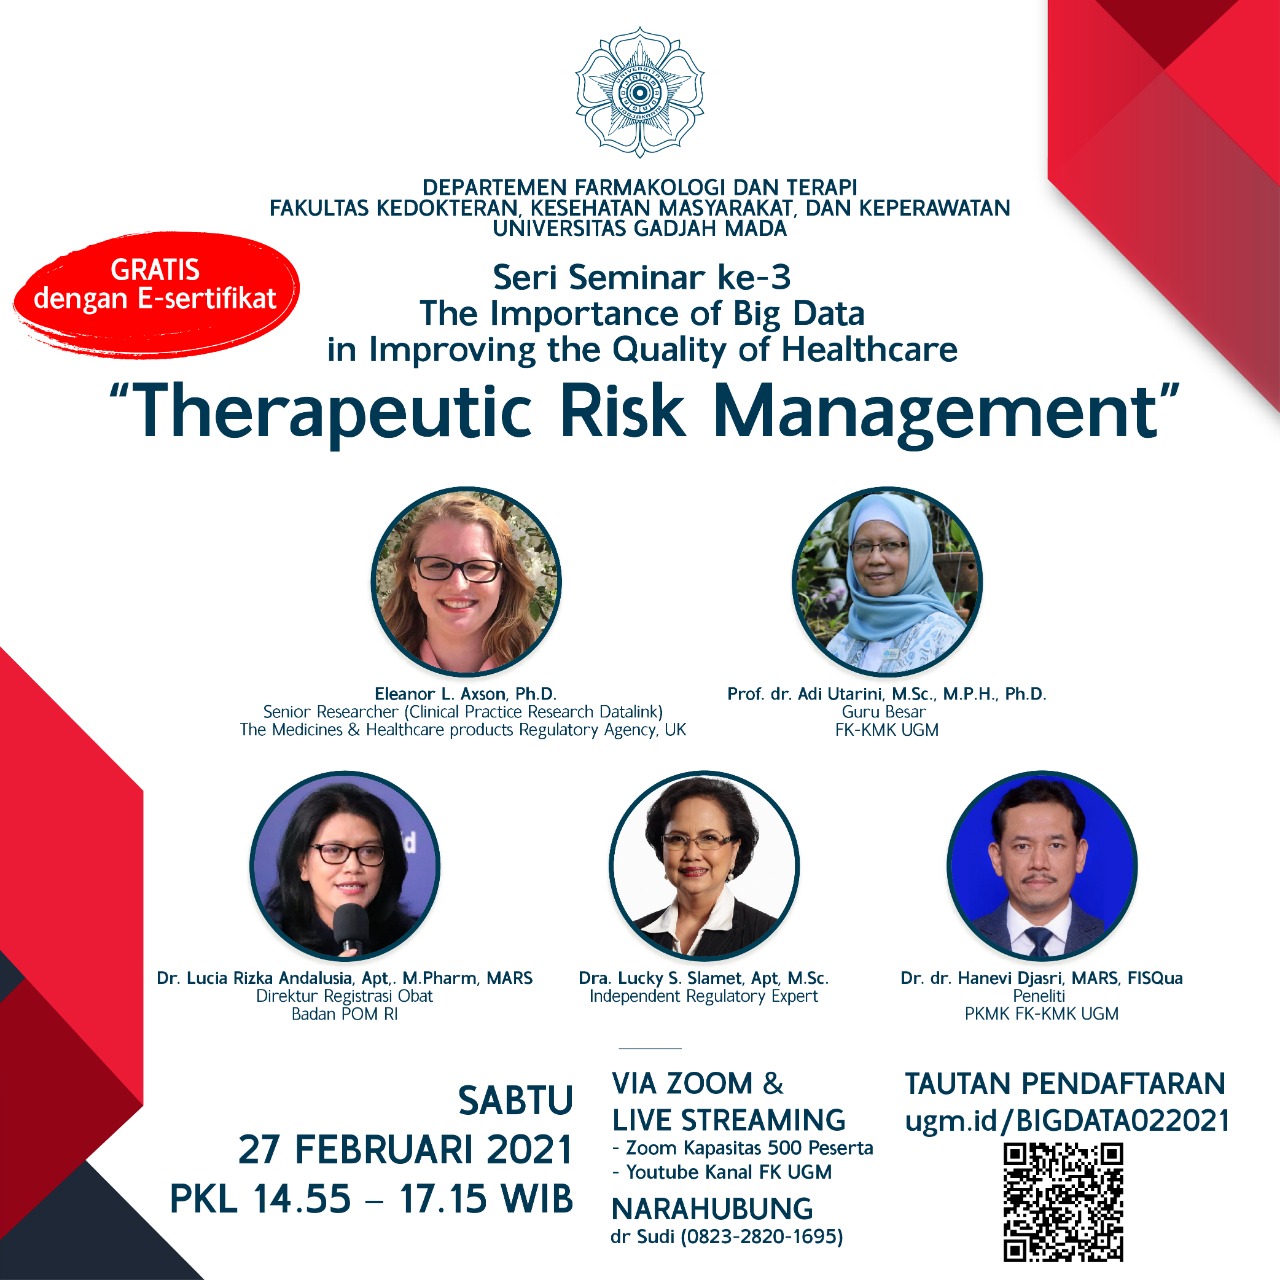 Seminar Daring “The Importance of Big Data  in Improving the Quality of Healthcare” vol. III THERAPEUTIC RISK MANAGEMENT